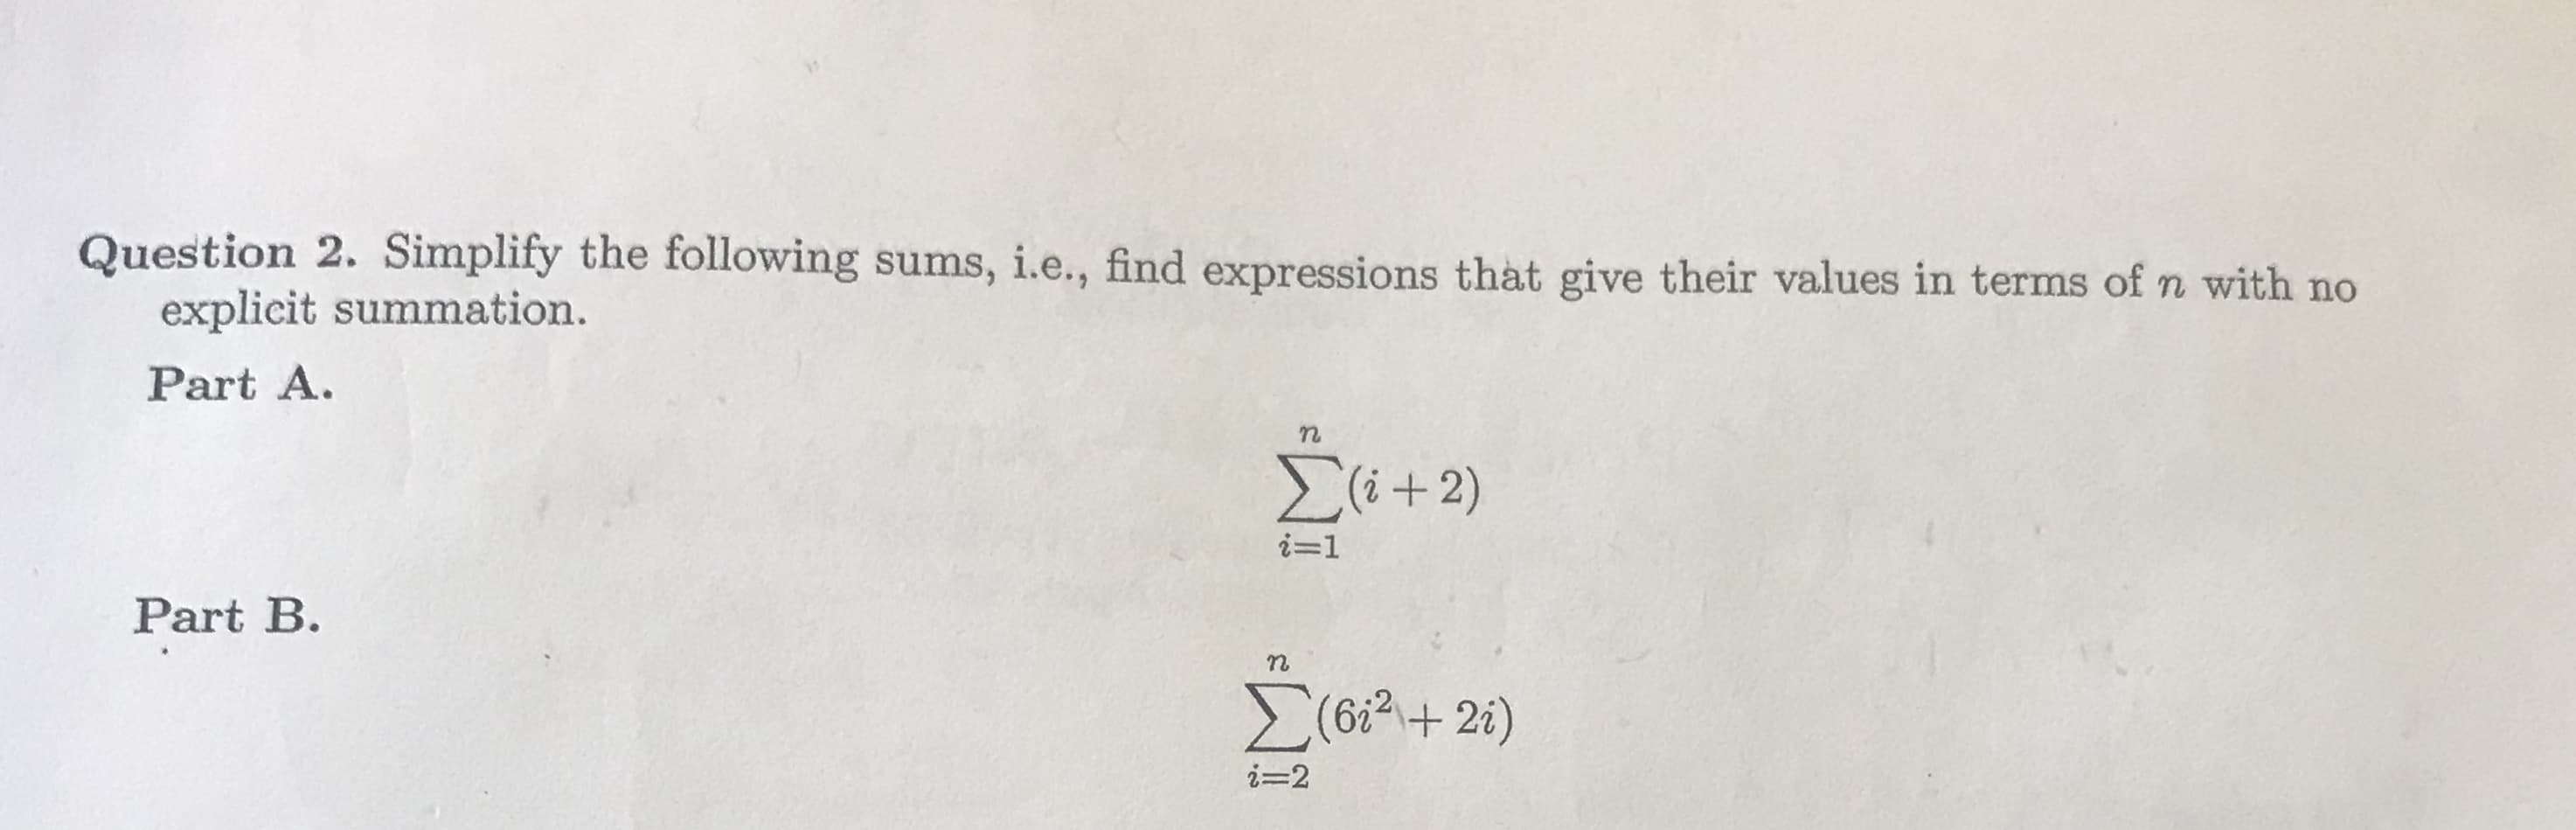 Question 2. Simplity the following sums, i.e, find expressions that give their values in terms of n with no
, i.e., find expressions that give their values in terms of n with no
explicit summation.
Part A.
ー1
Part B.
6i2+ 2
i-2
